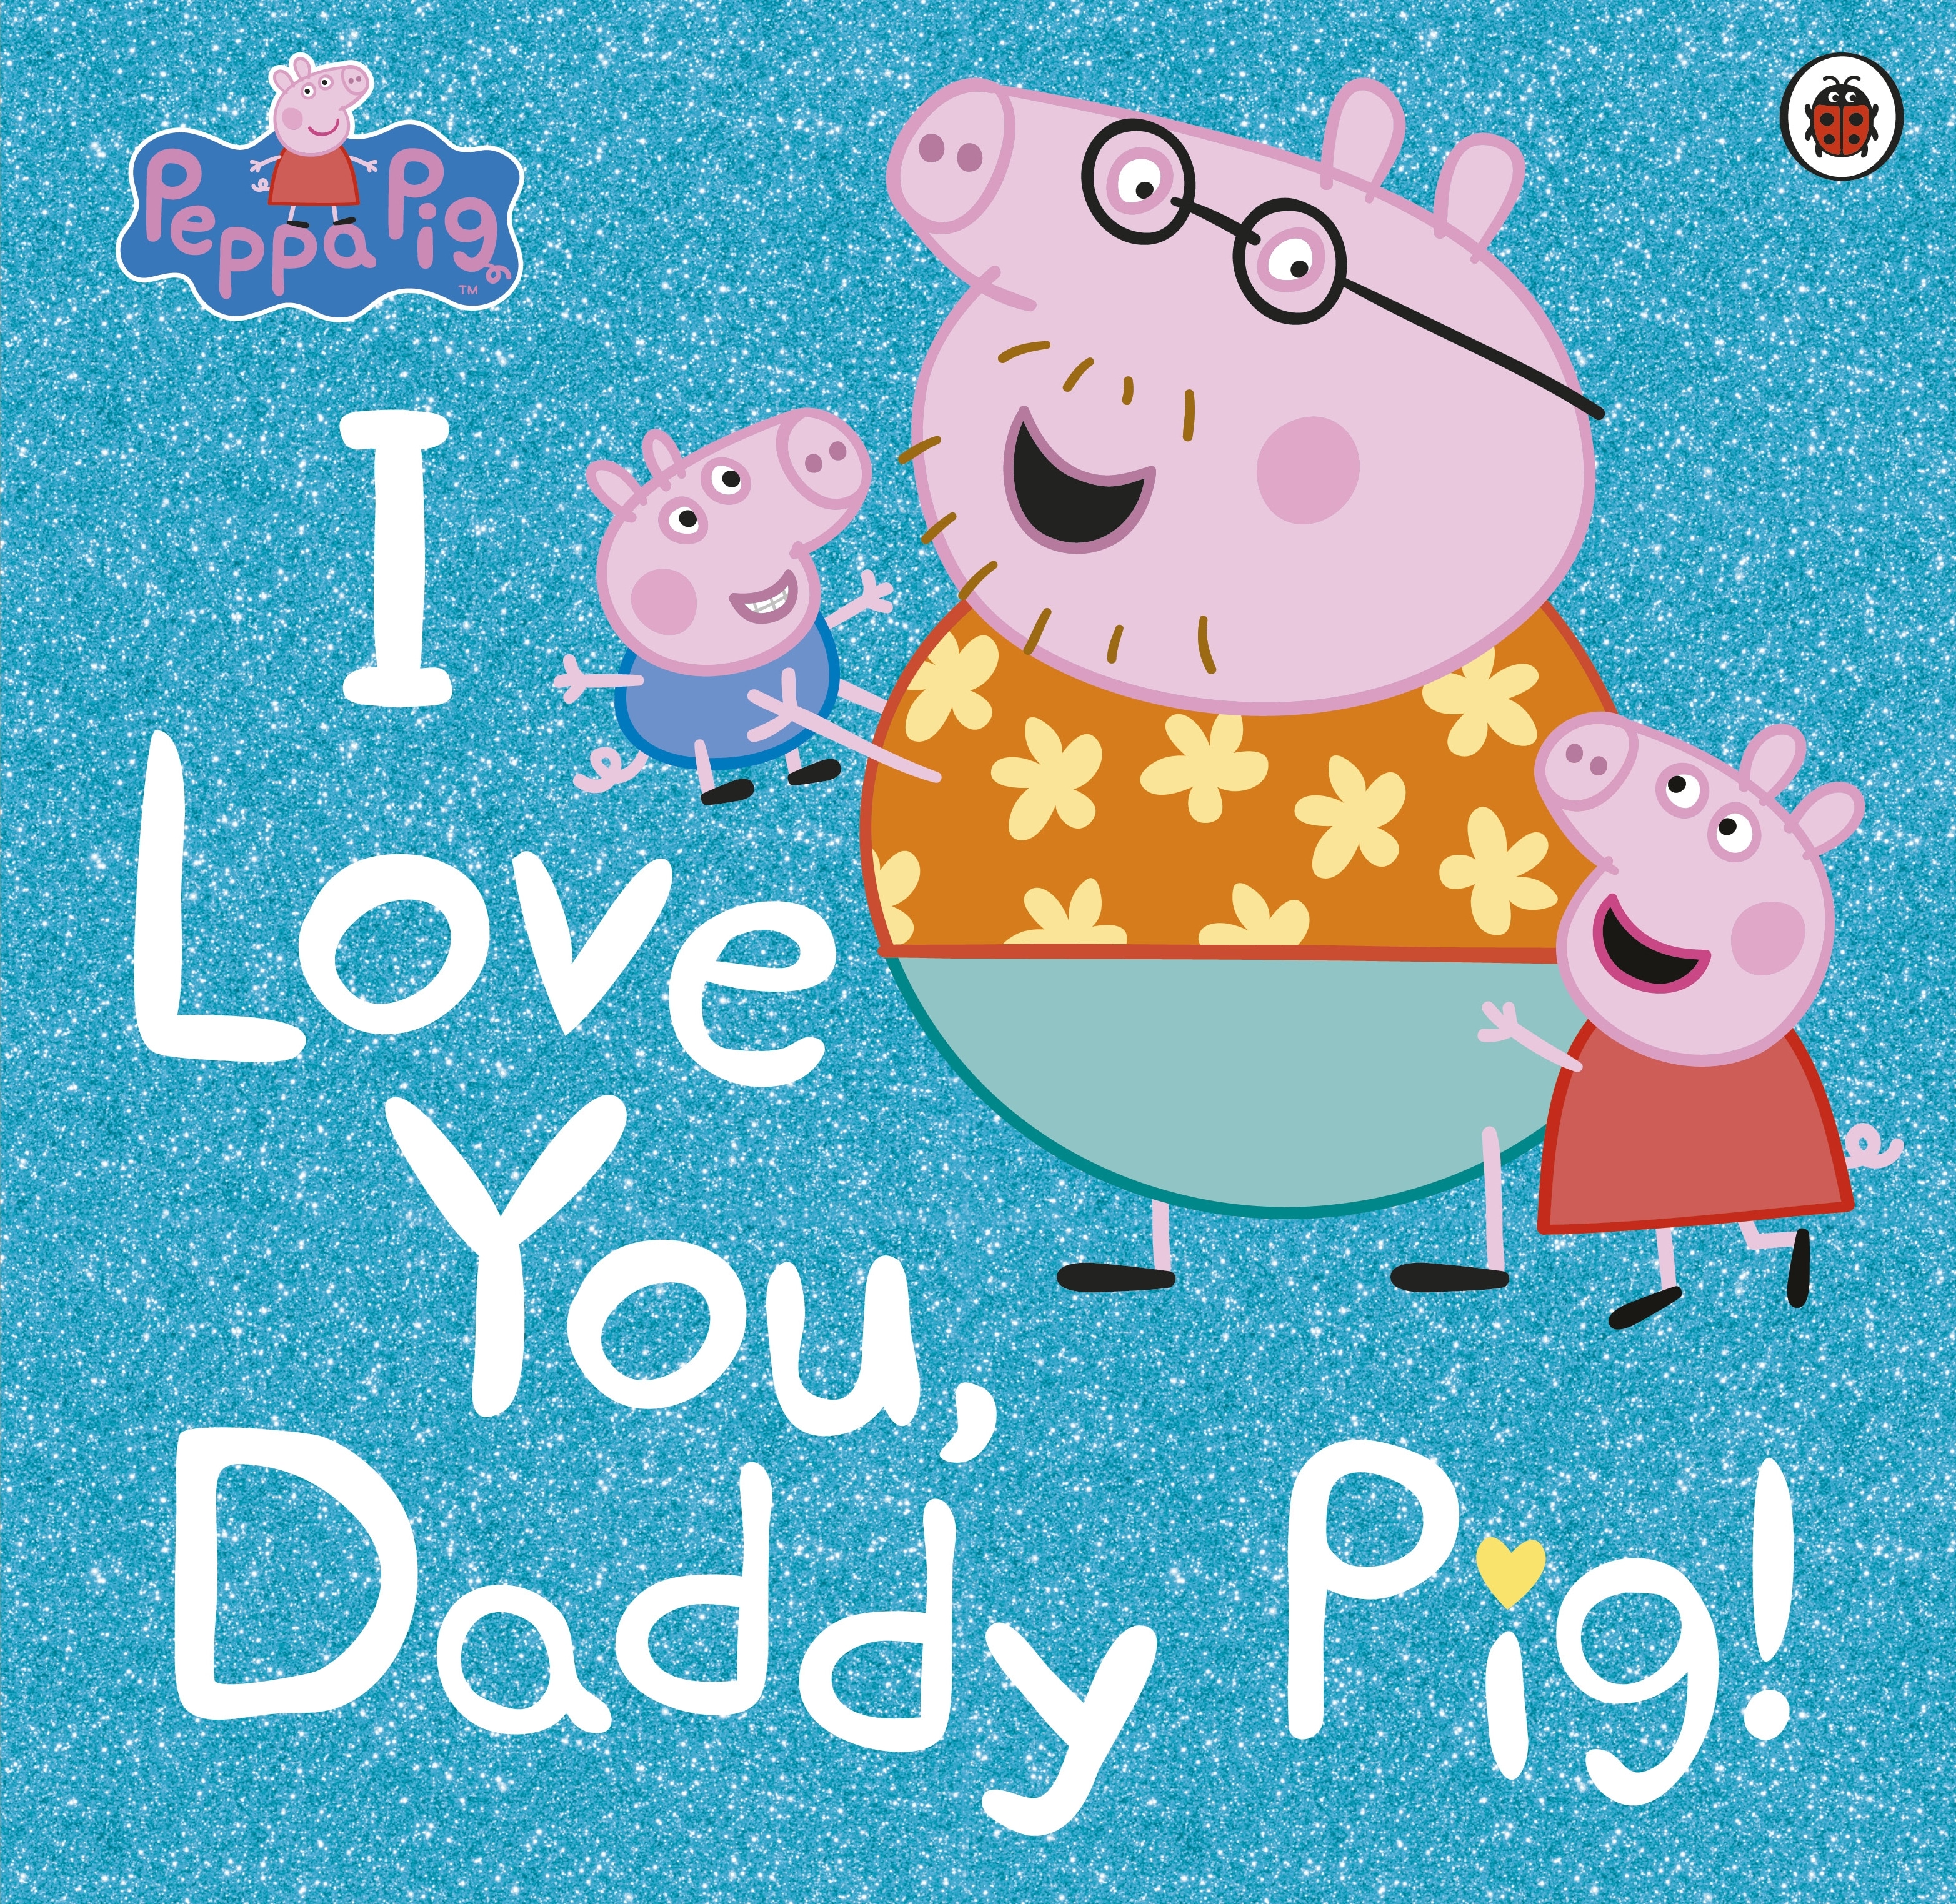 Book “Peppa Pig: I Love You, Daddy Pig” by Peppa Pig — May 2, 2019